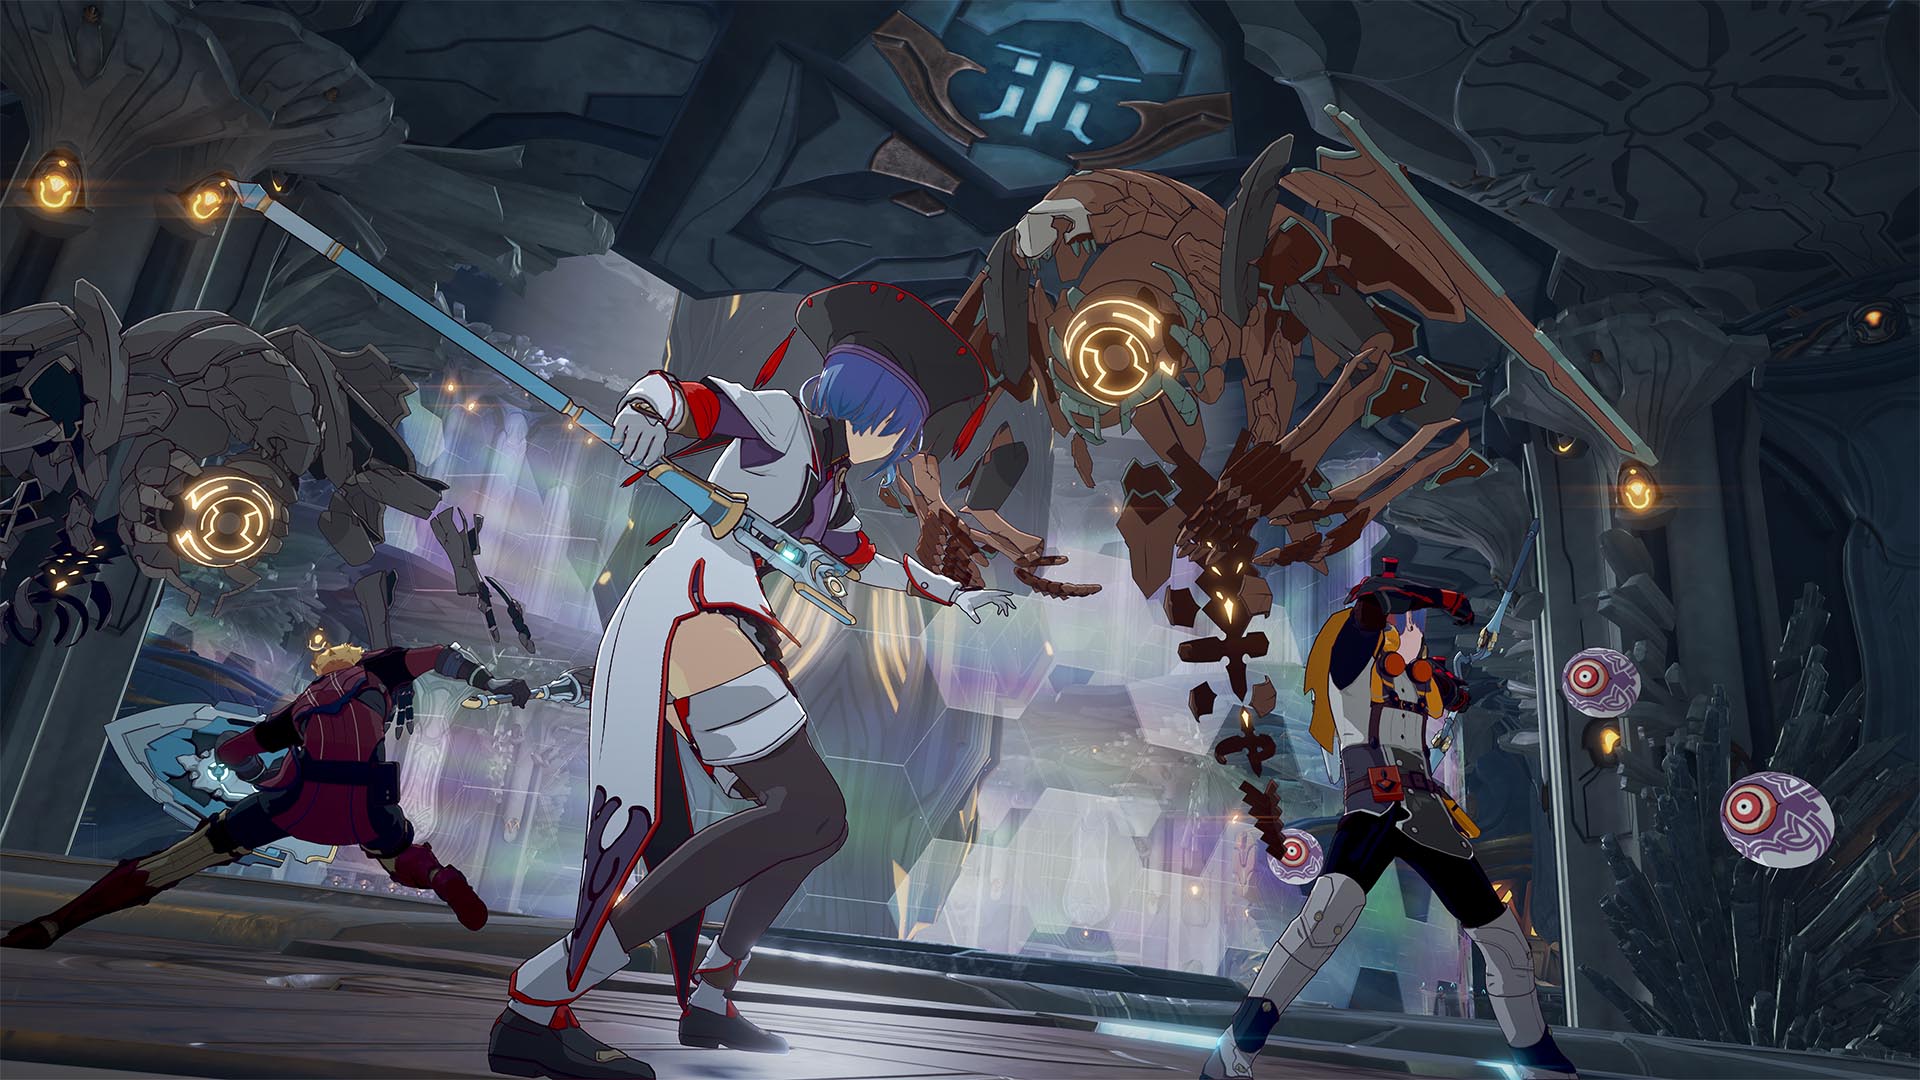 s next game is an anime MMO called Blue Protocol - The Verge